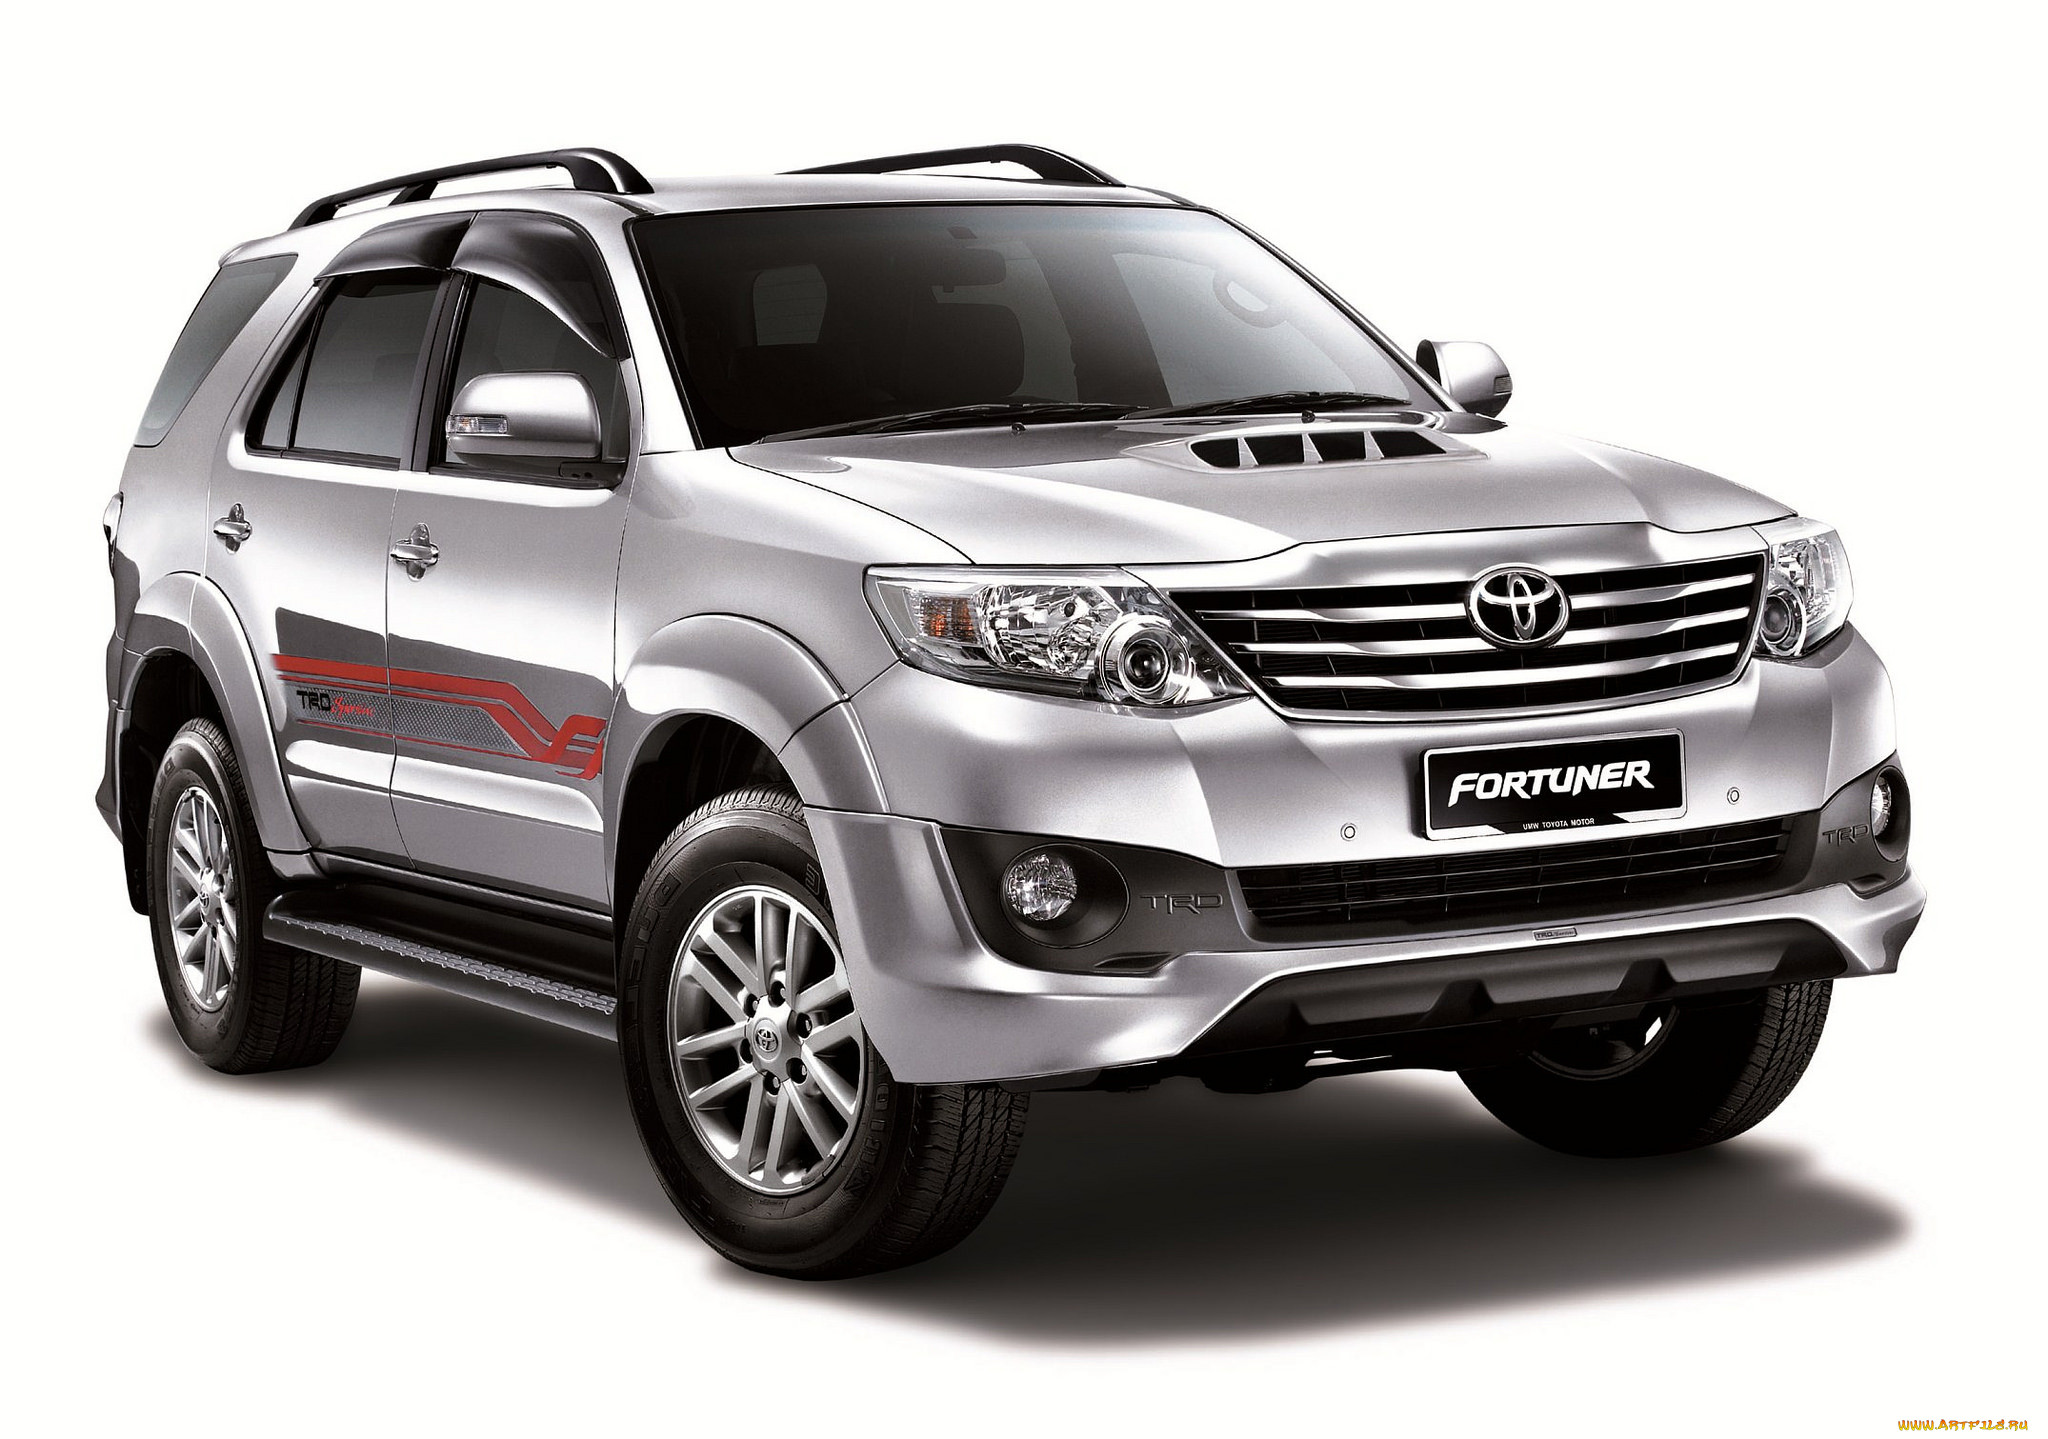 2015 modifications toyota fortuner widescreen, , toyota, 